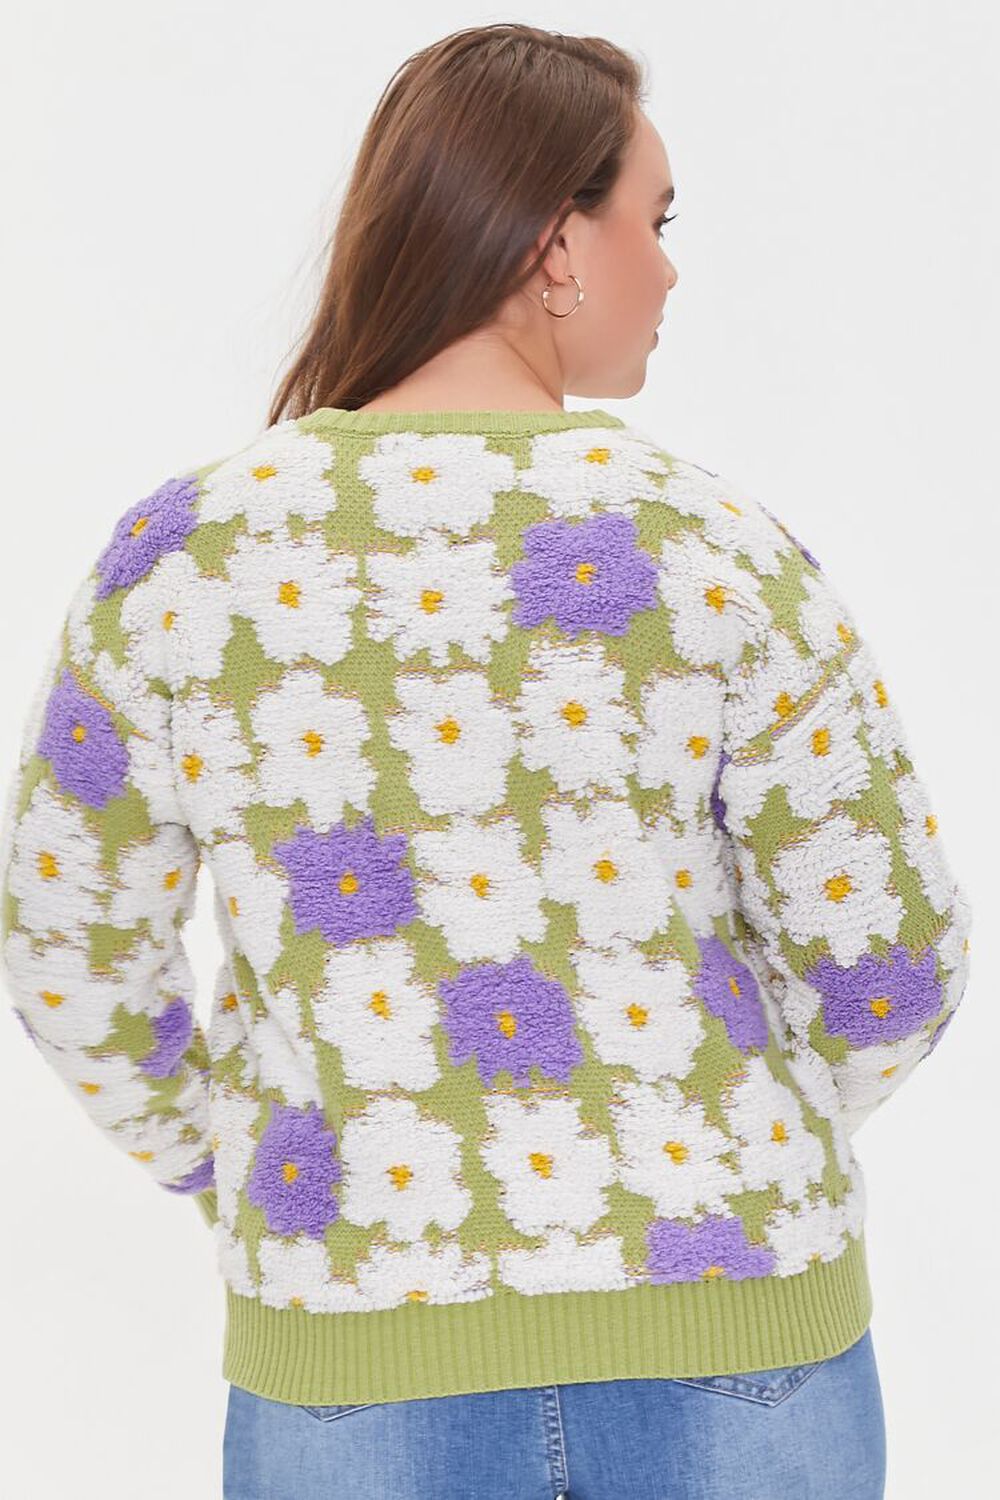 AVOCADO/MULTI Plus Size Textured Floral Sweater, image 3